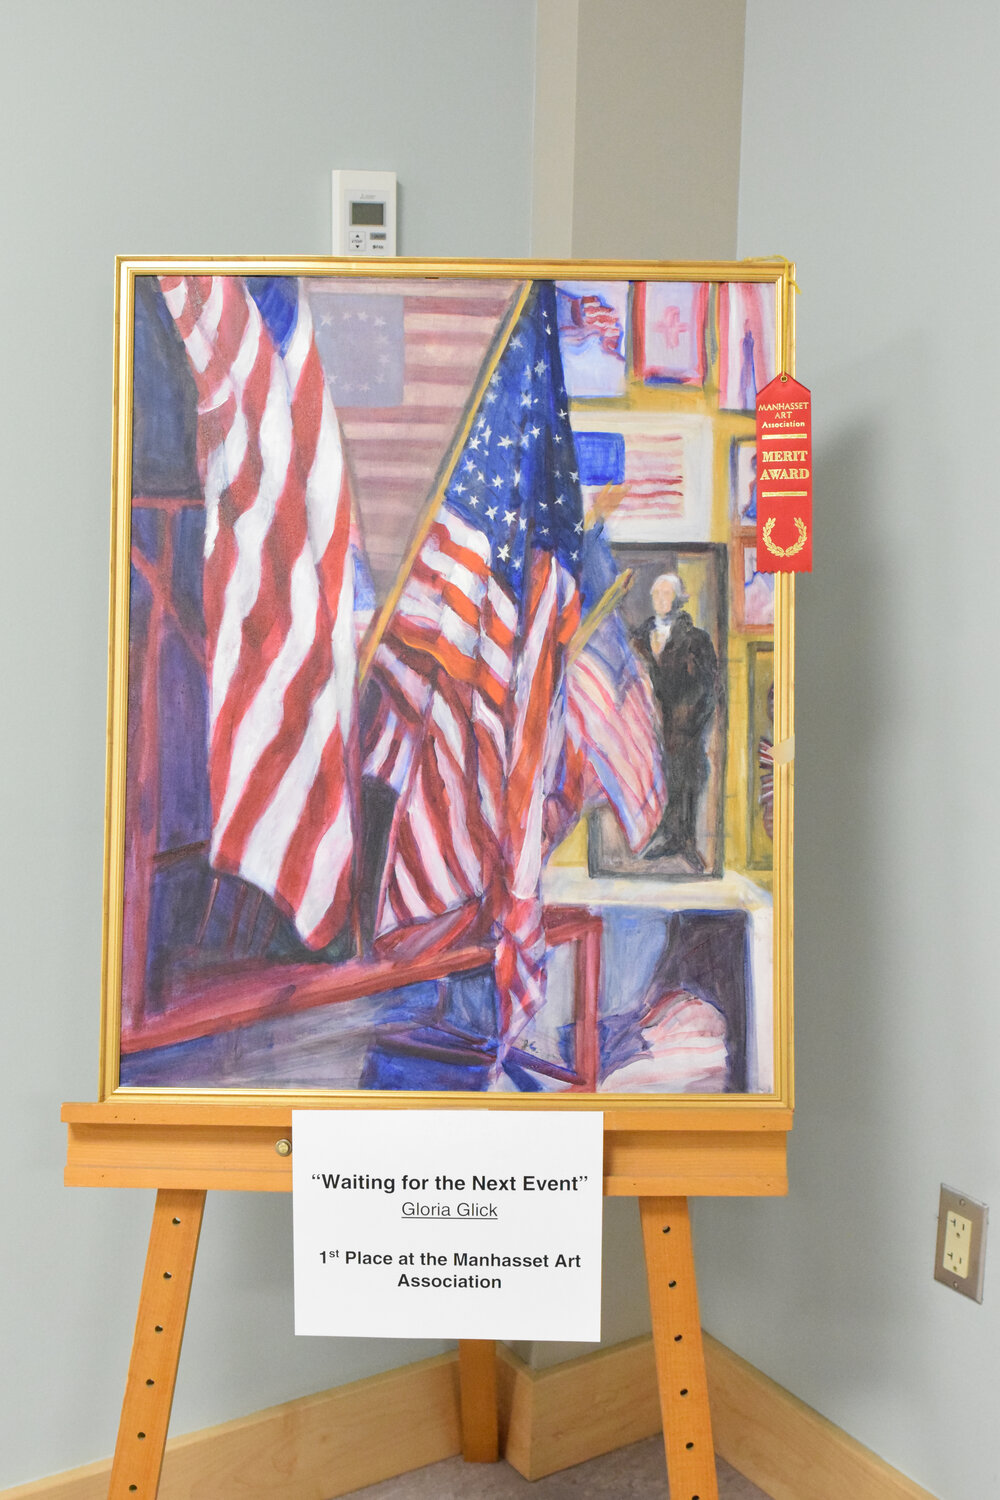 The show features the work of Gloria Glick — an accomplished artist and longtime East Meadow resident, as well as the work of her students. Above, Glick’s painting ‘Waiting for the Next Event,’ which one first place at the Manhasset Art Association.